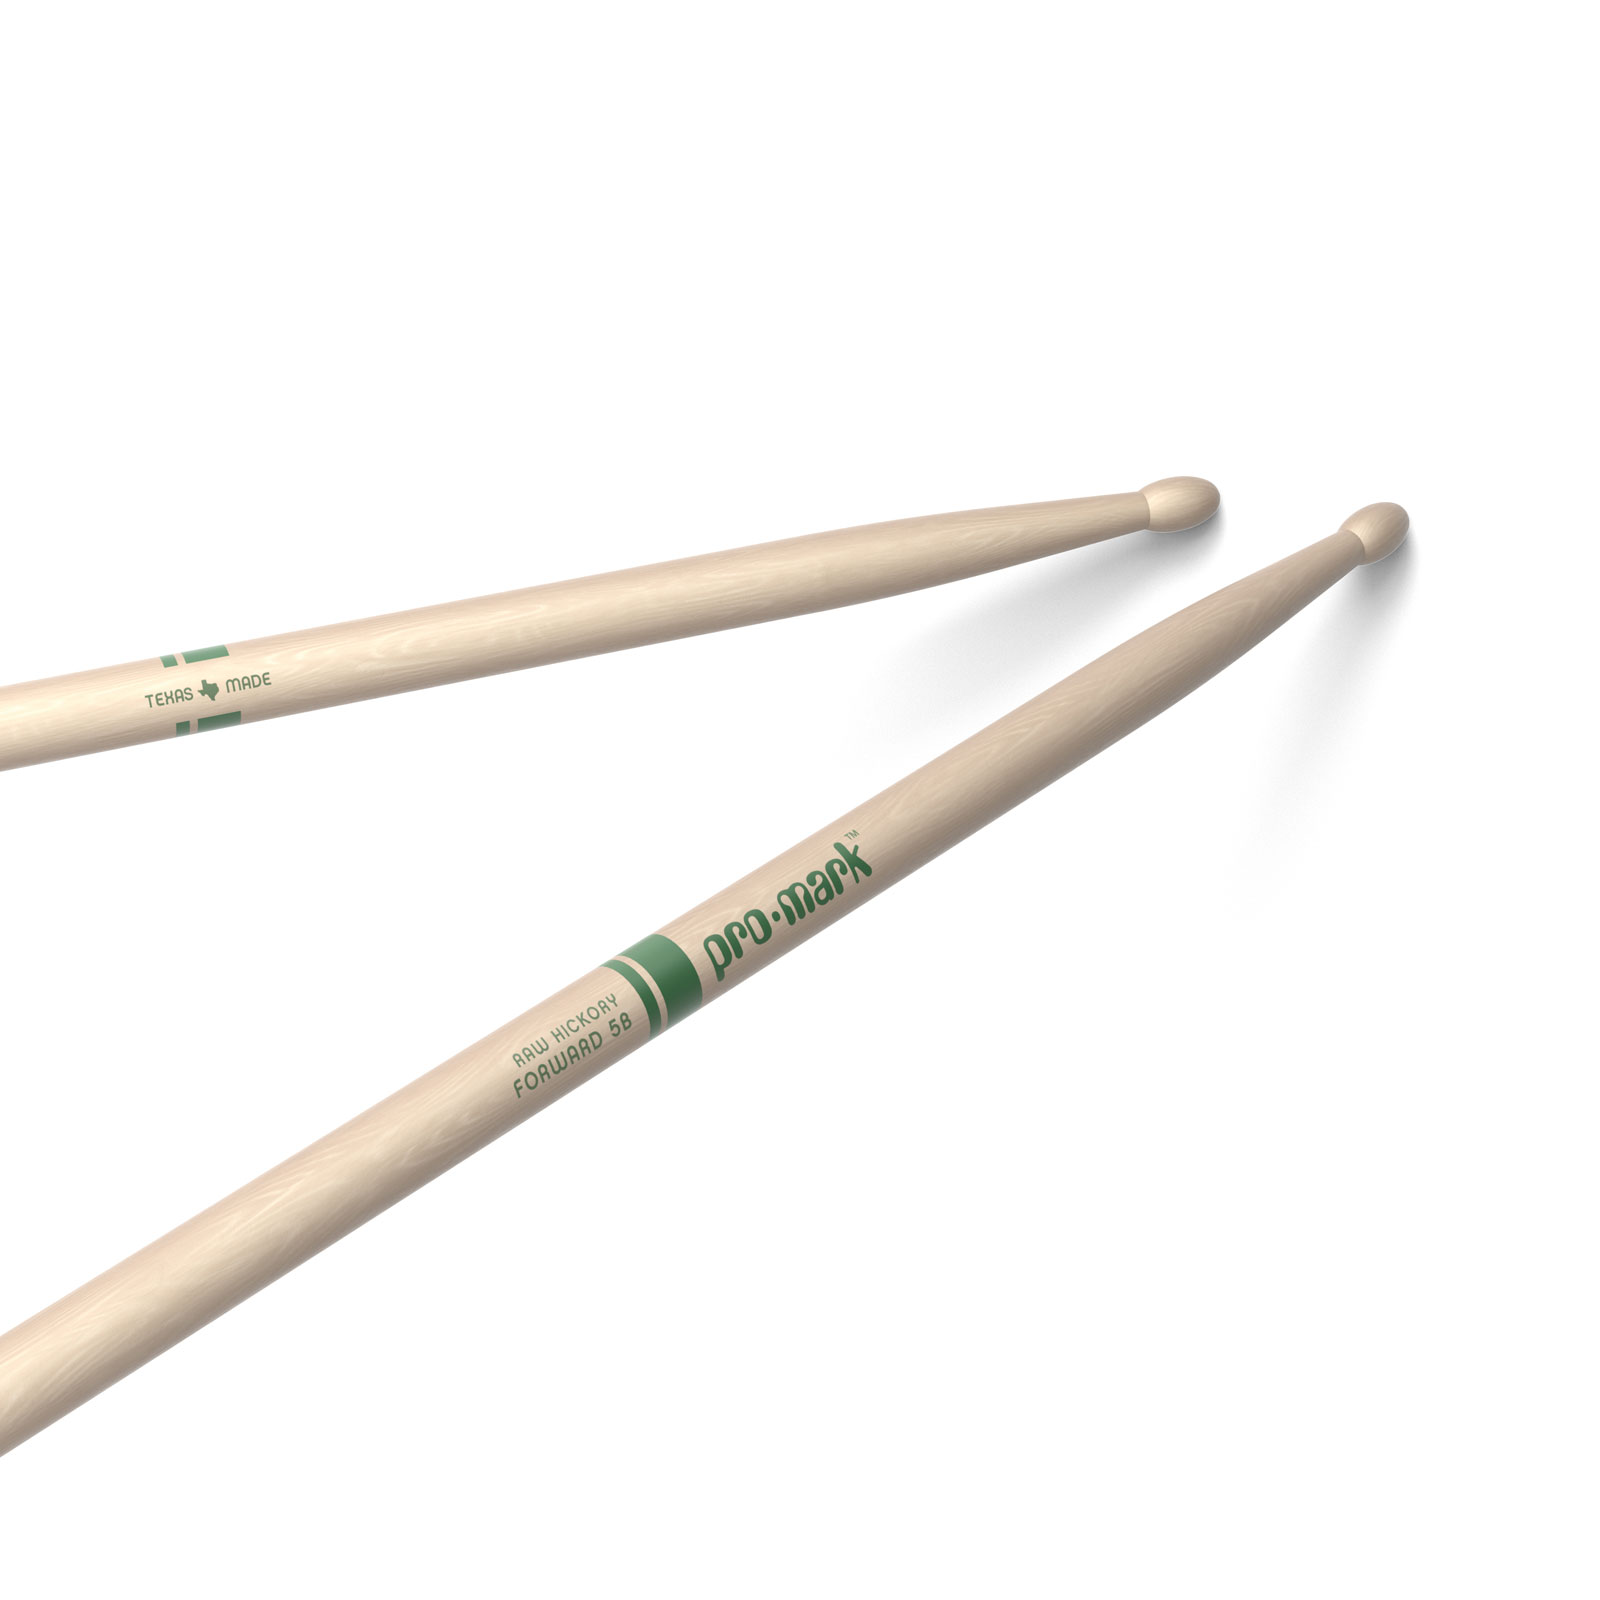 PRO MARK CLASSIC FORWARD 5B RAW HICKORY DRUMSTICK OVAL WOOD TIP